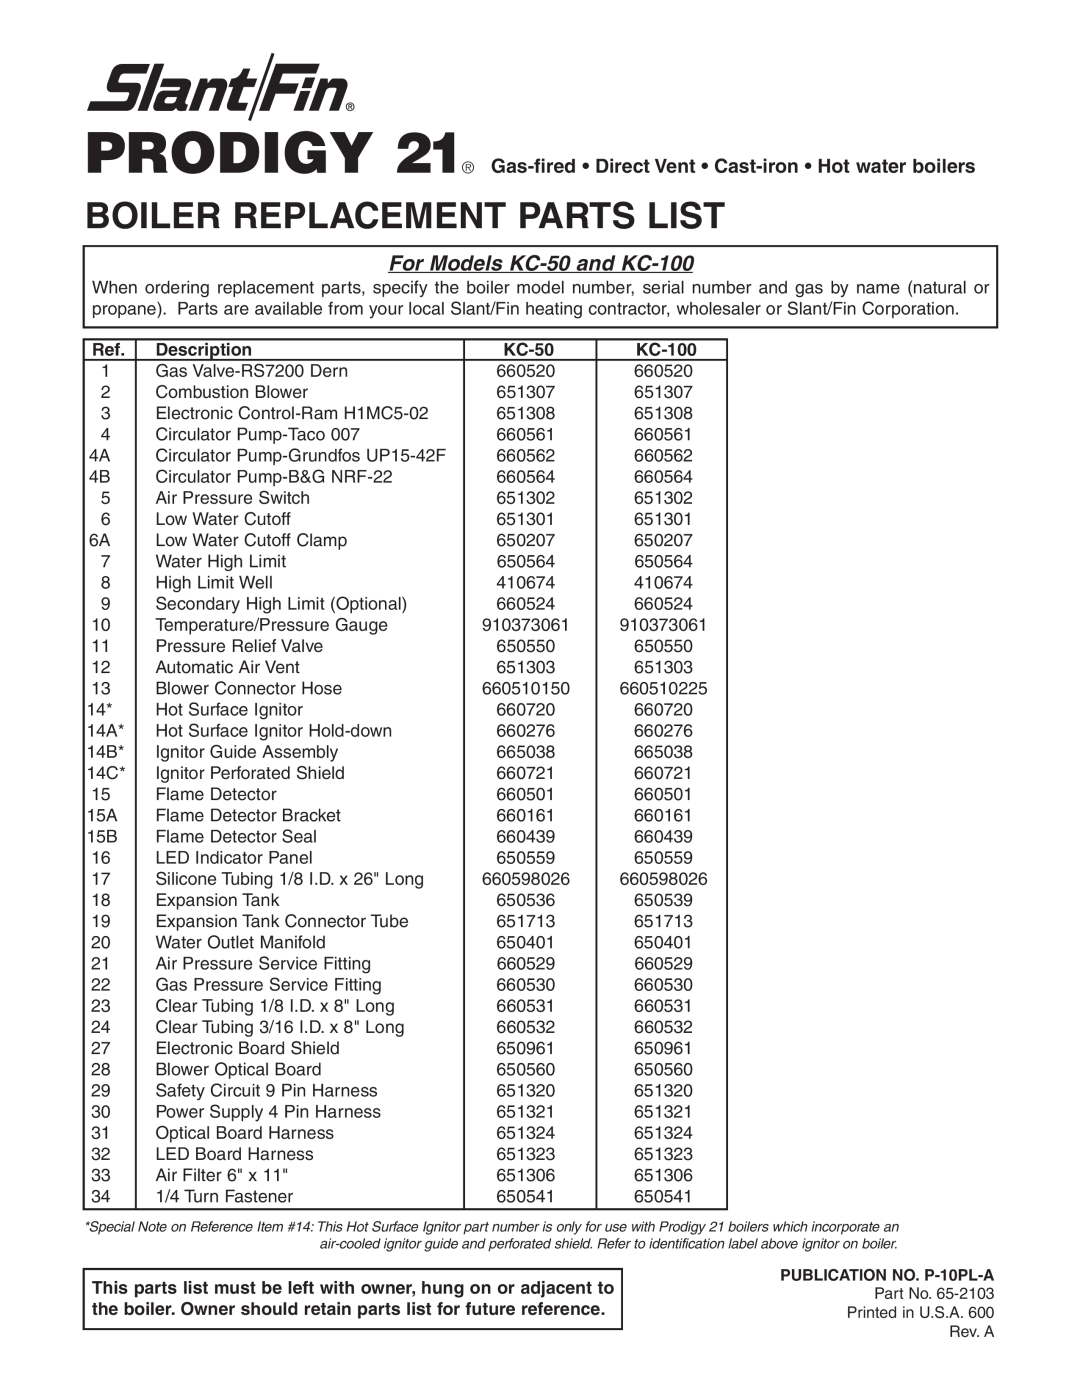 Slant/Fin manual Boiler Replacement Parts List, For Models KC-50and KC-100 